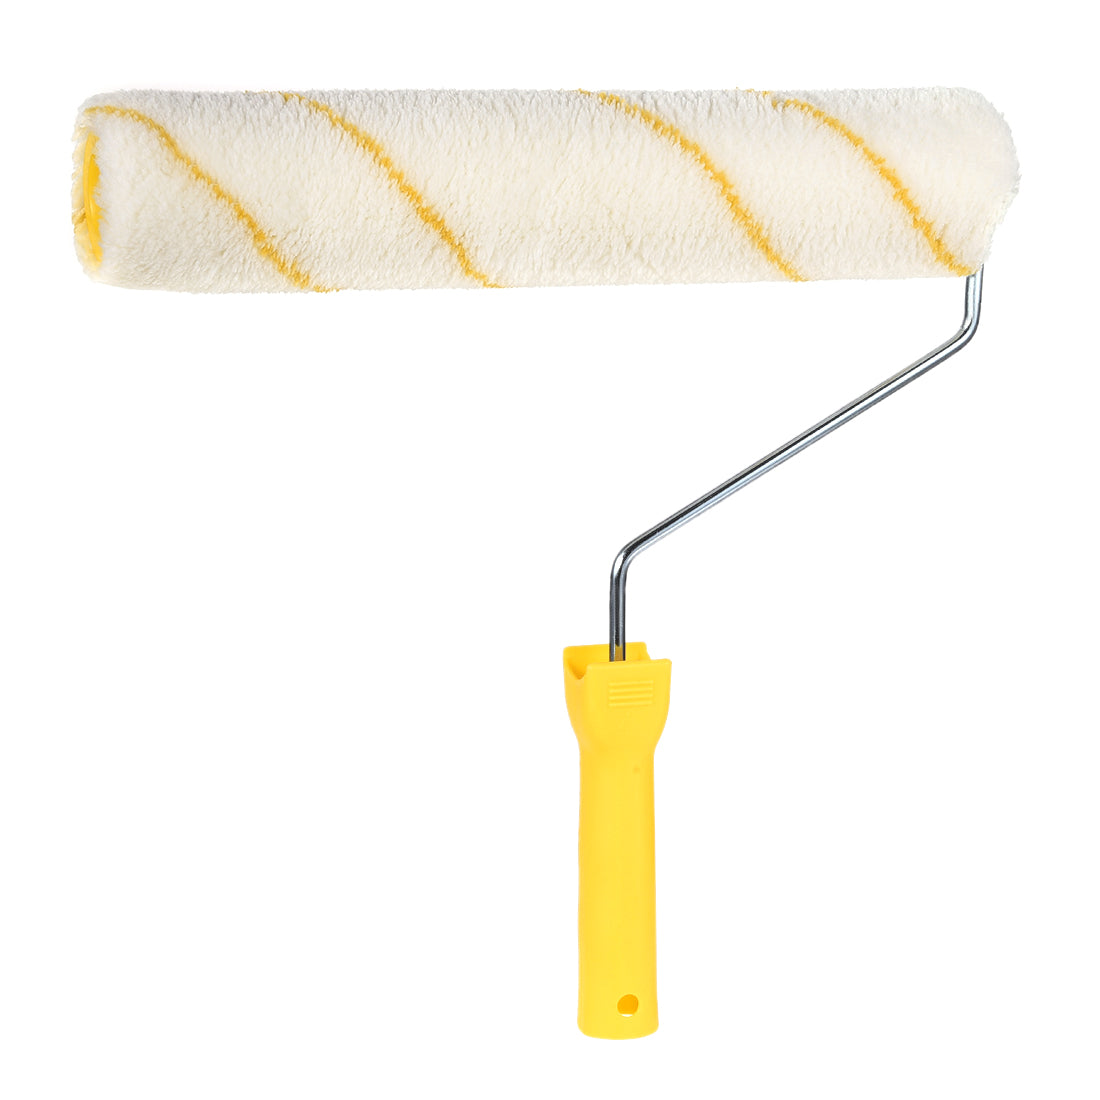 uxcell Uxcell Paint Roller Brush 12 Inch 305mm for Household Wall Painting Treatment with Plastic Handle